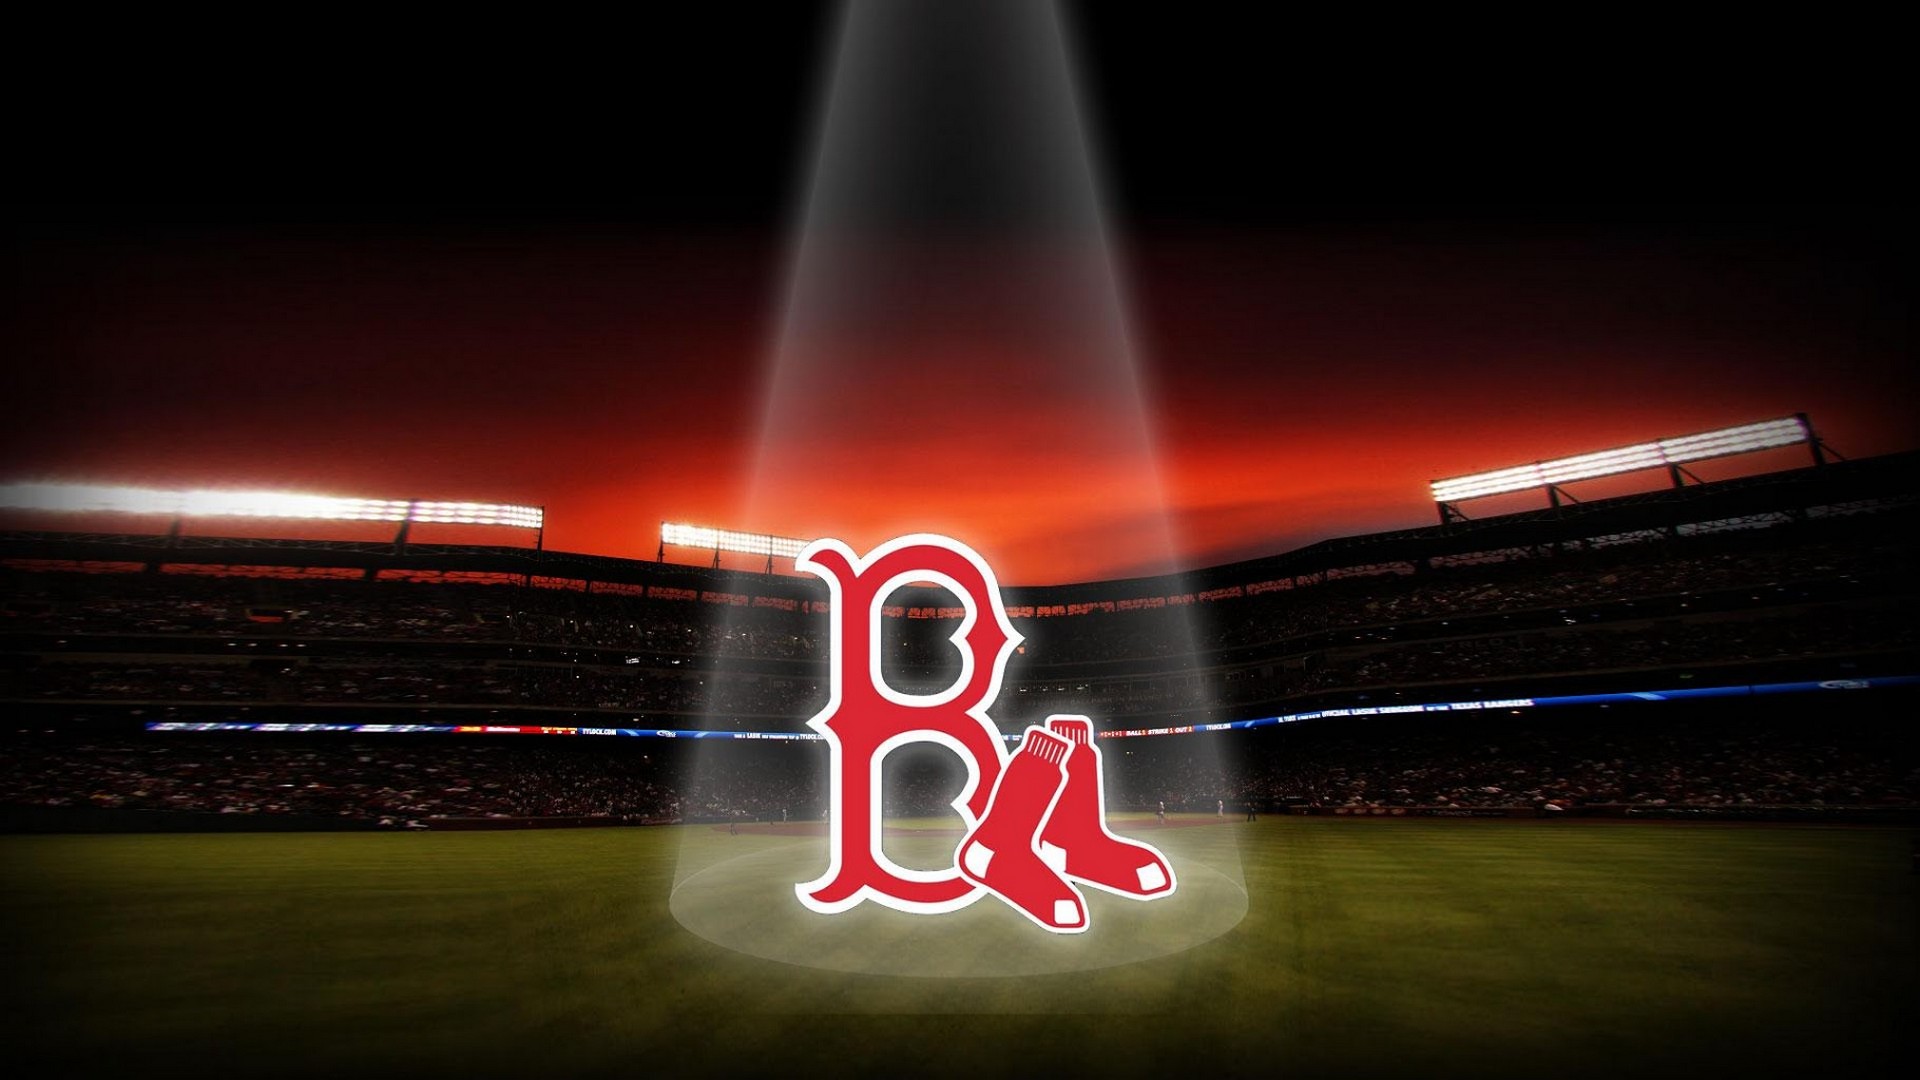 Boston Red Sox Wallpaper with high-resolution 1920x1080 pixel. You can use this wallpaper for Mac Desktop Wallpaper, Laptop Screensavers, Android Wallpapers, Tablet or iPhone Home Screen and another mobile phone device